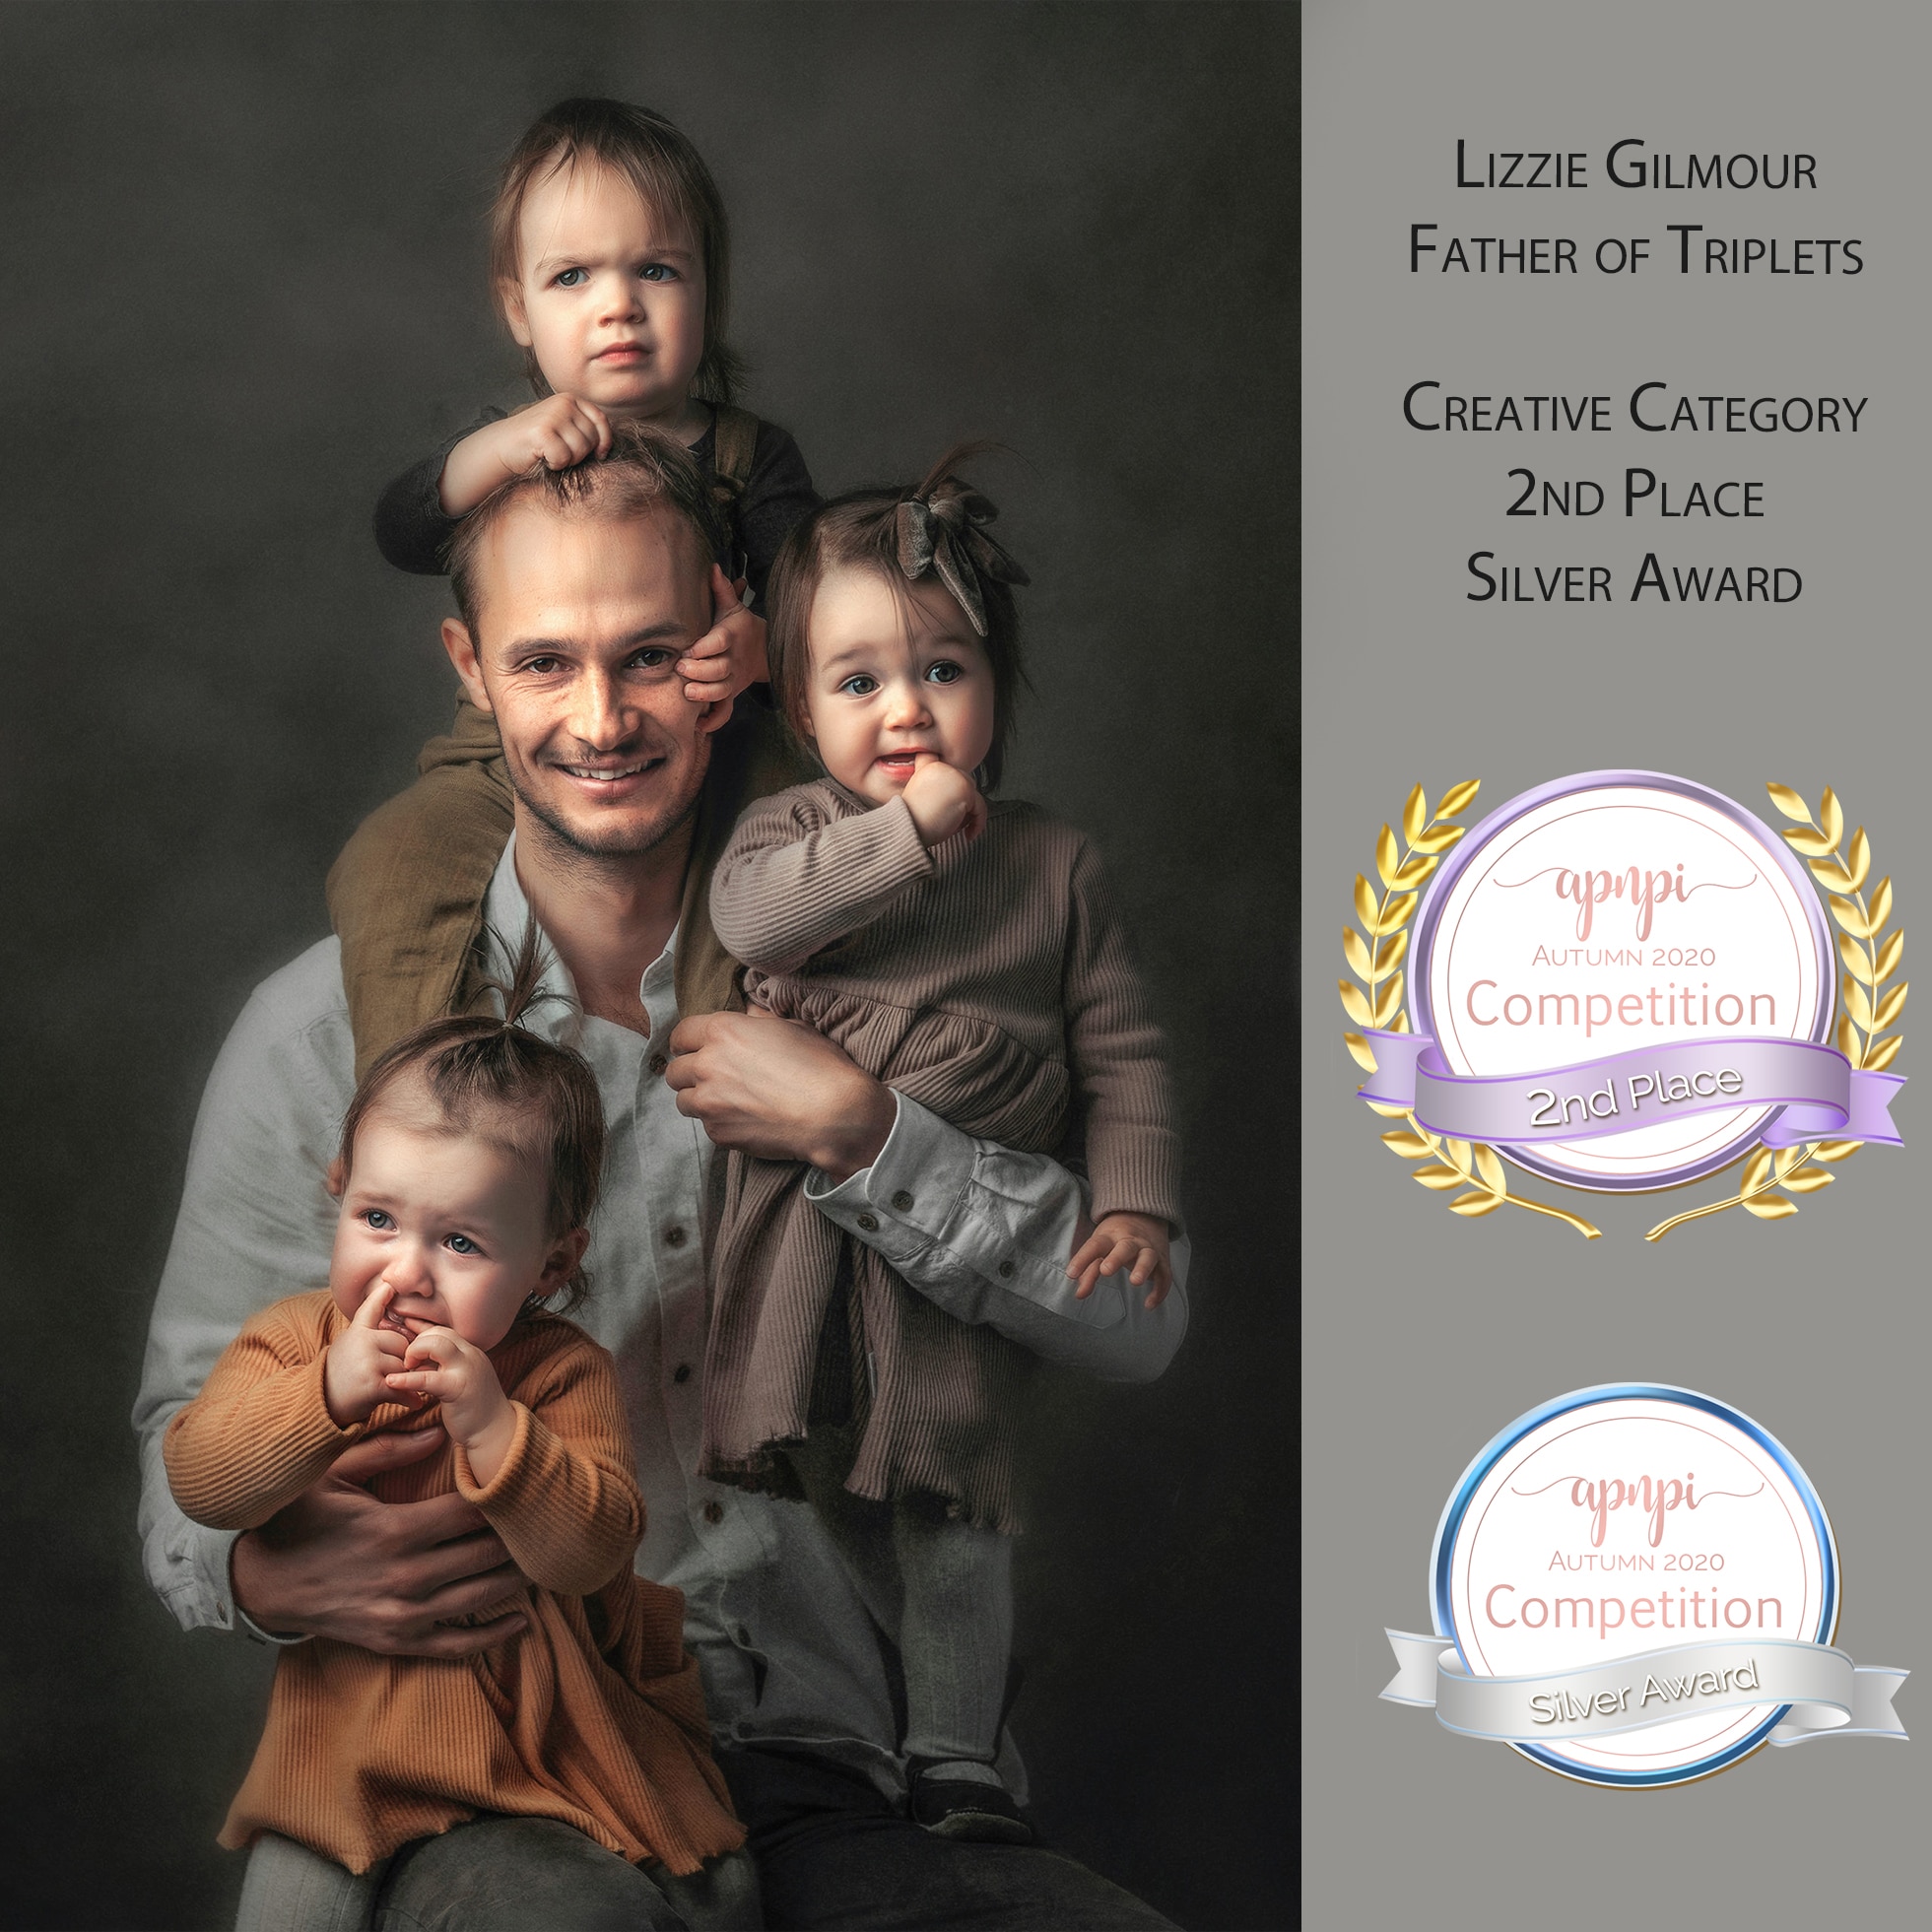 APNPI Competition 2nd Place Winner – Creative. “Father of Triplets” by Lizzie Gilmour